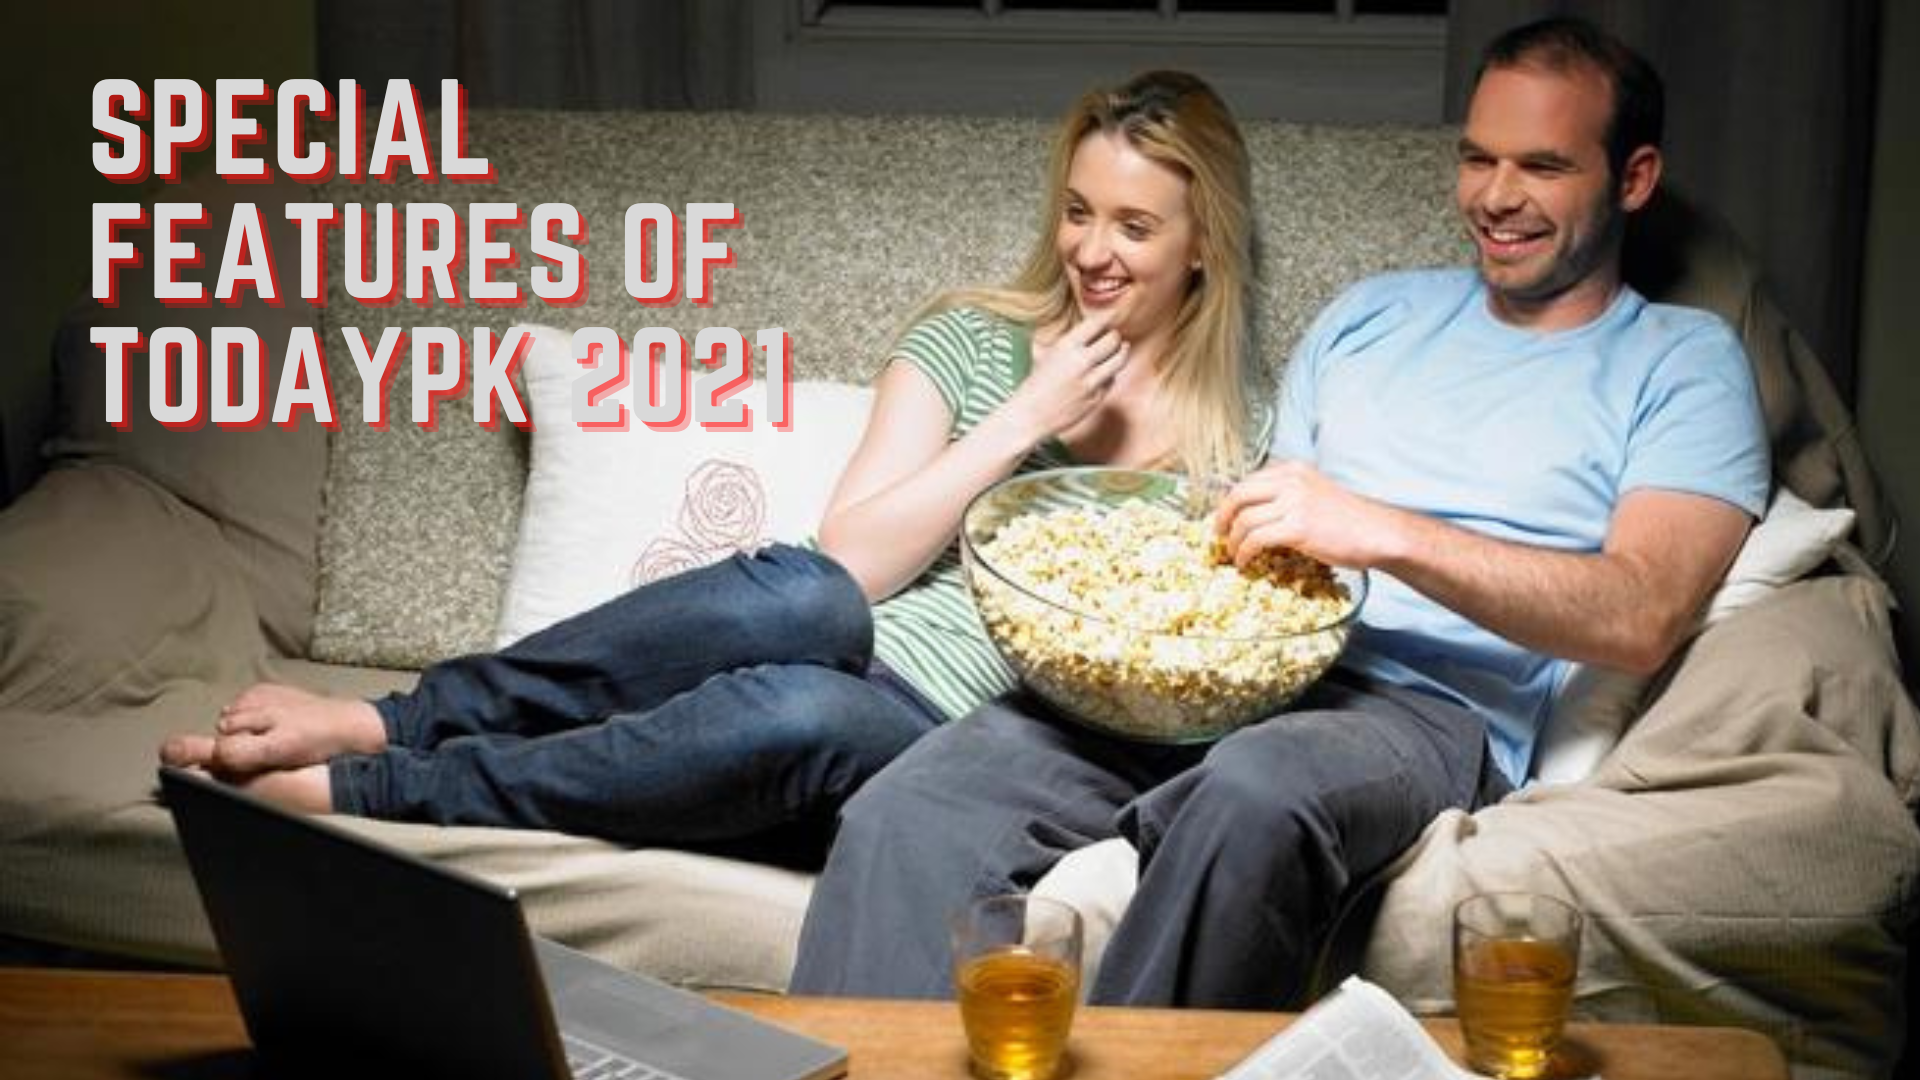 A couple sitting on a couch and watching movie from a laptop while eating popcorn